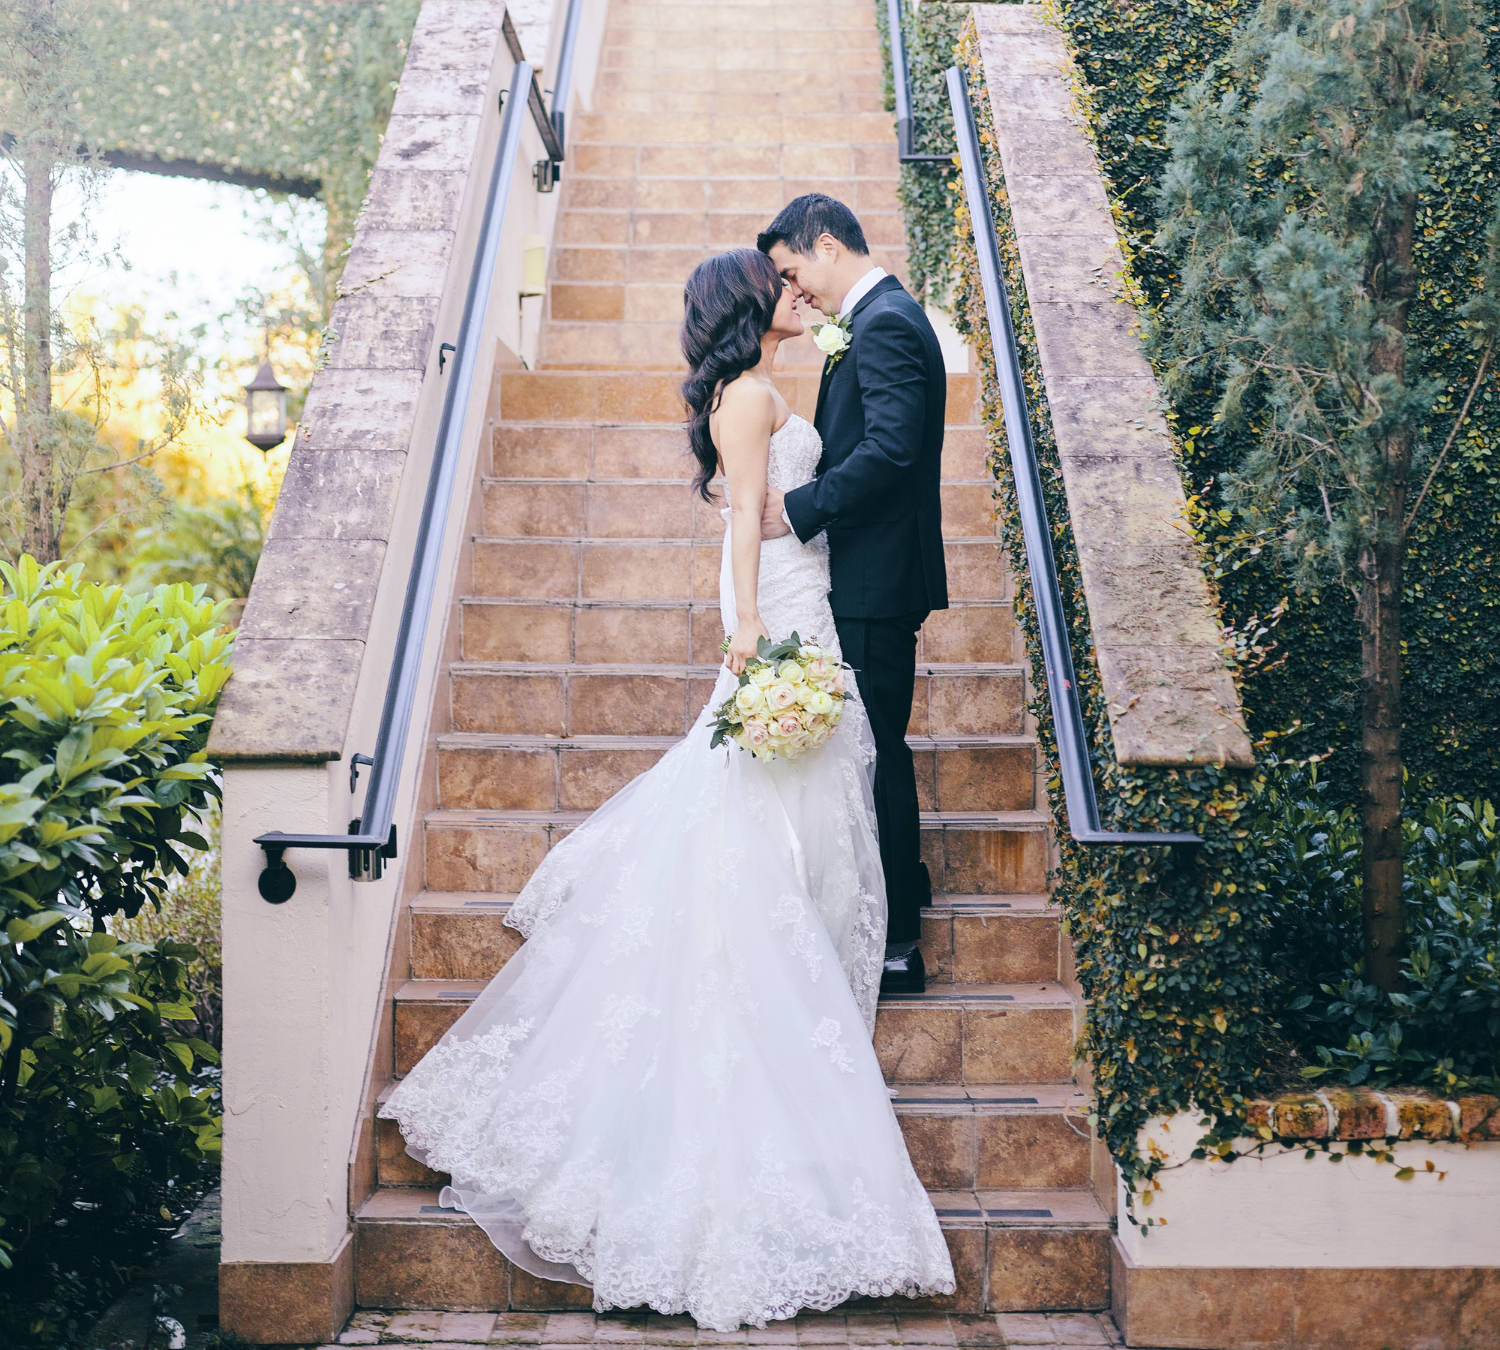 Dreamy European-Inspired Wedding At The Bell Tower on 34th